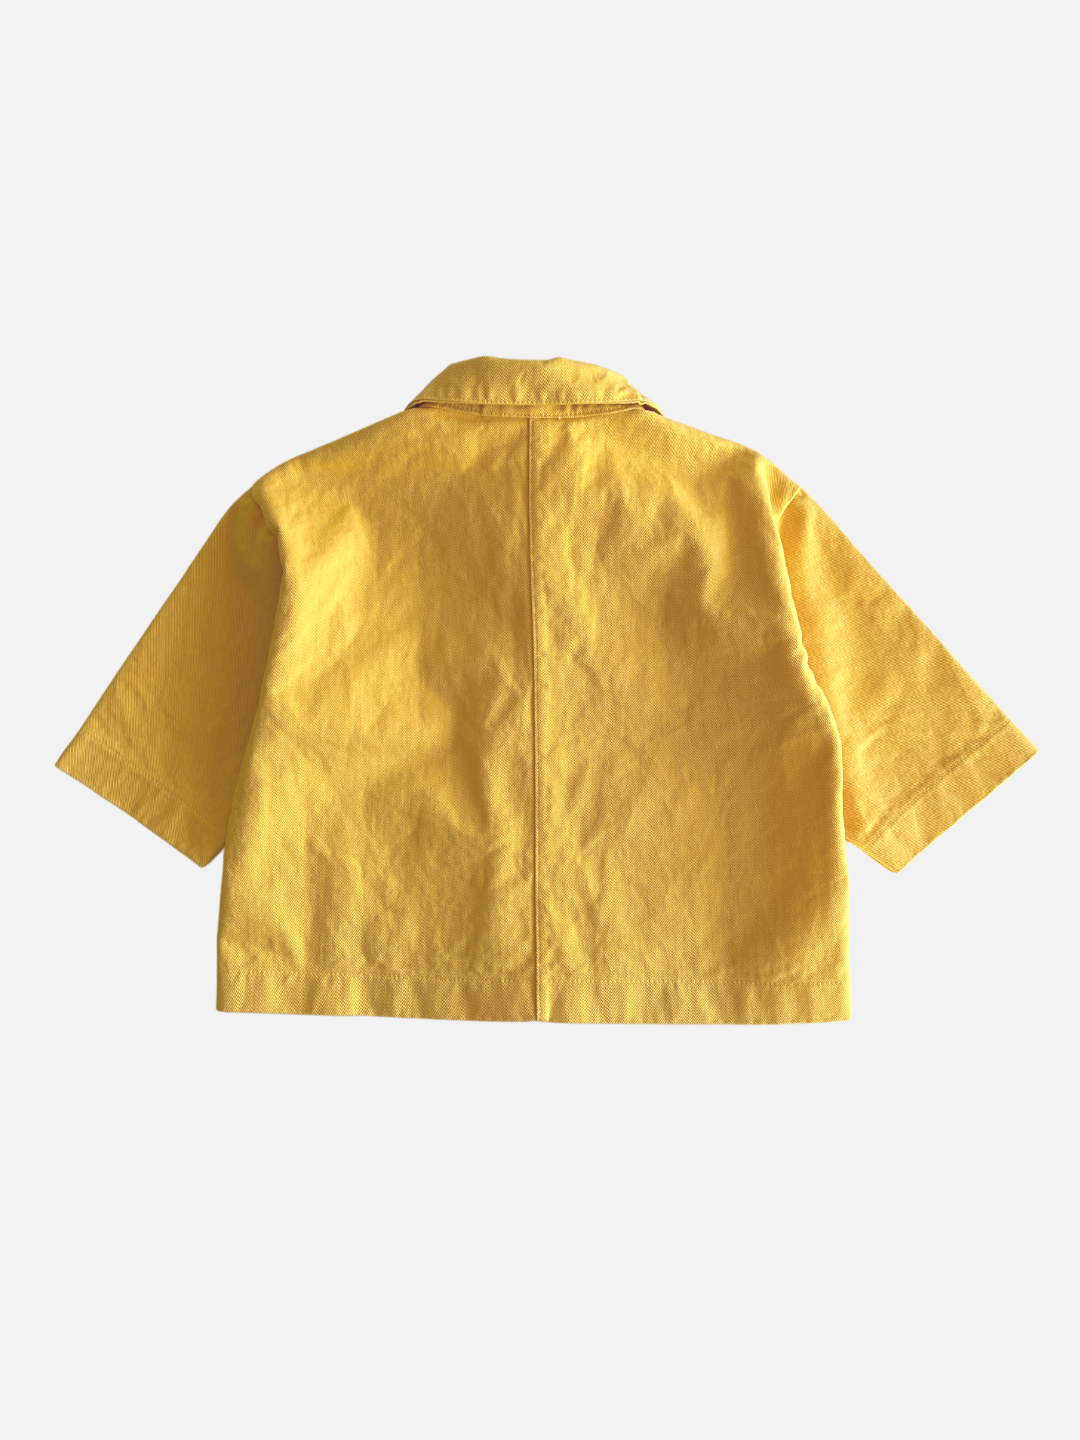 A kids' jacket in yellow, back view